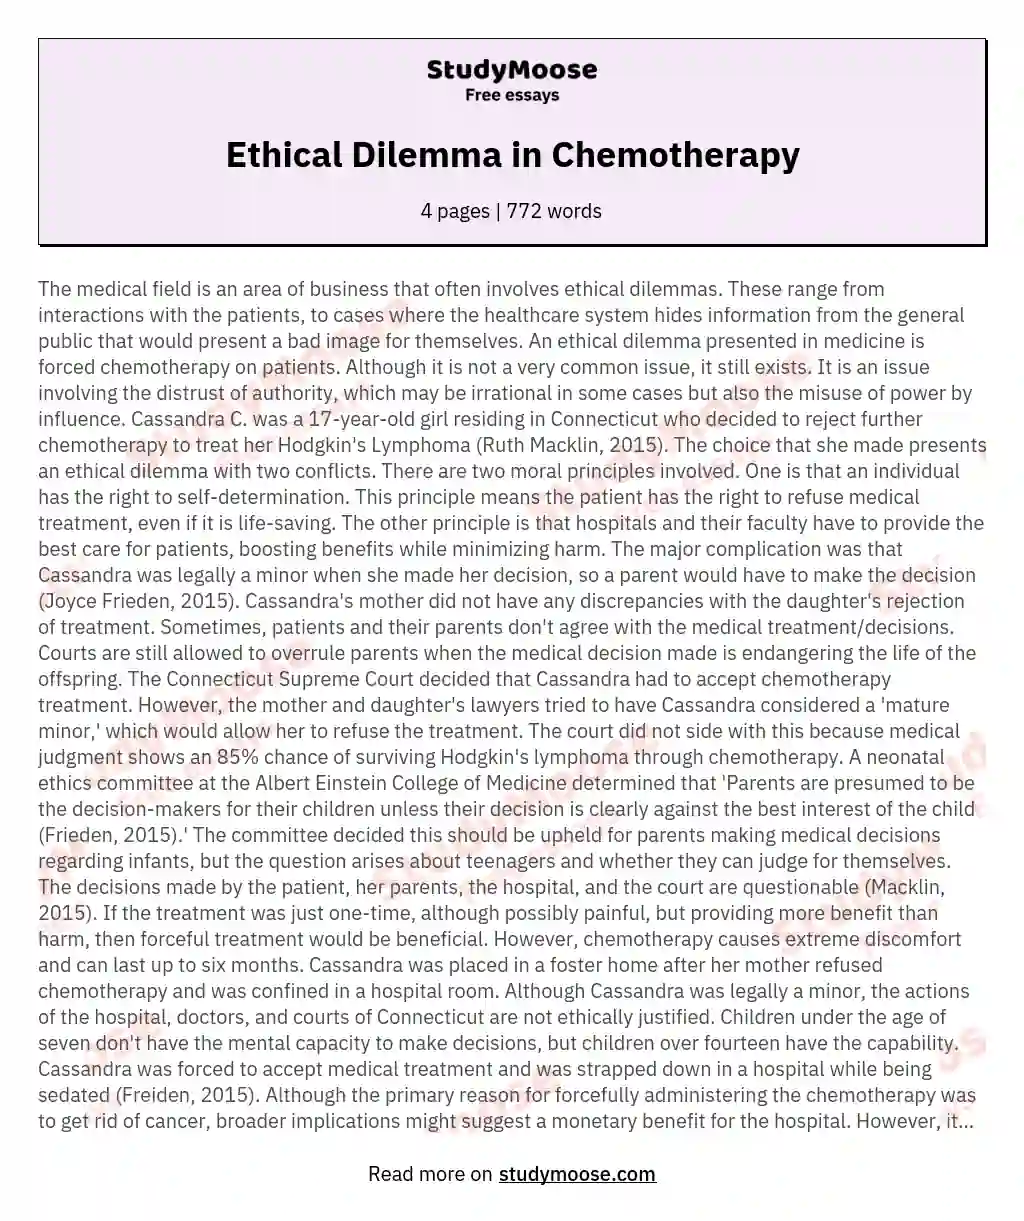 Ethical Dilemma in Chemotherapy